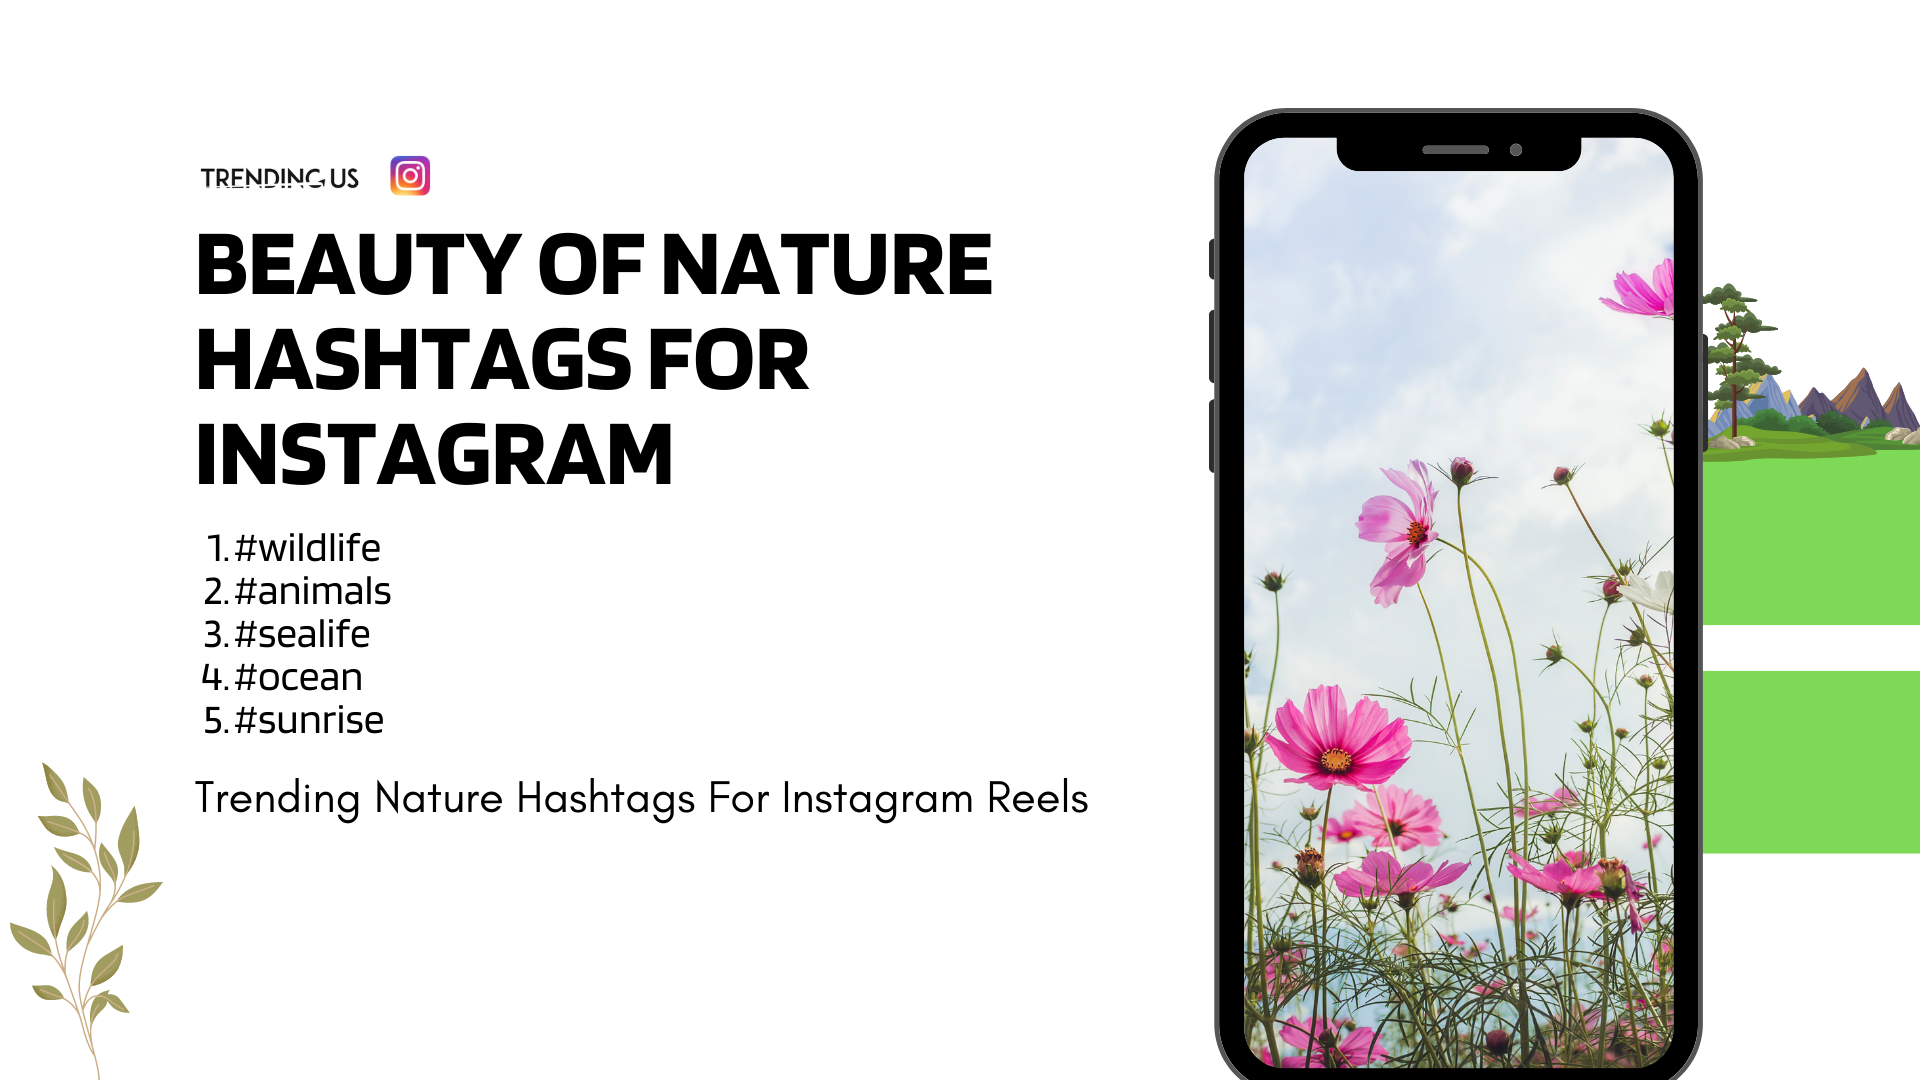 Beauty Of Nature Hashtags For Instagram 